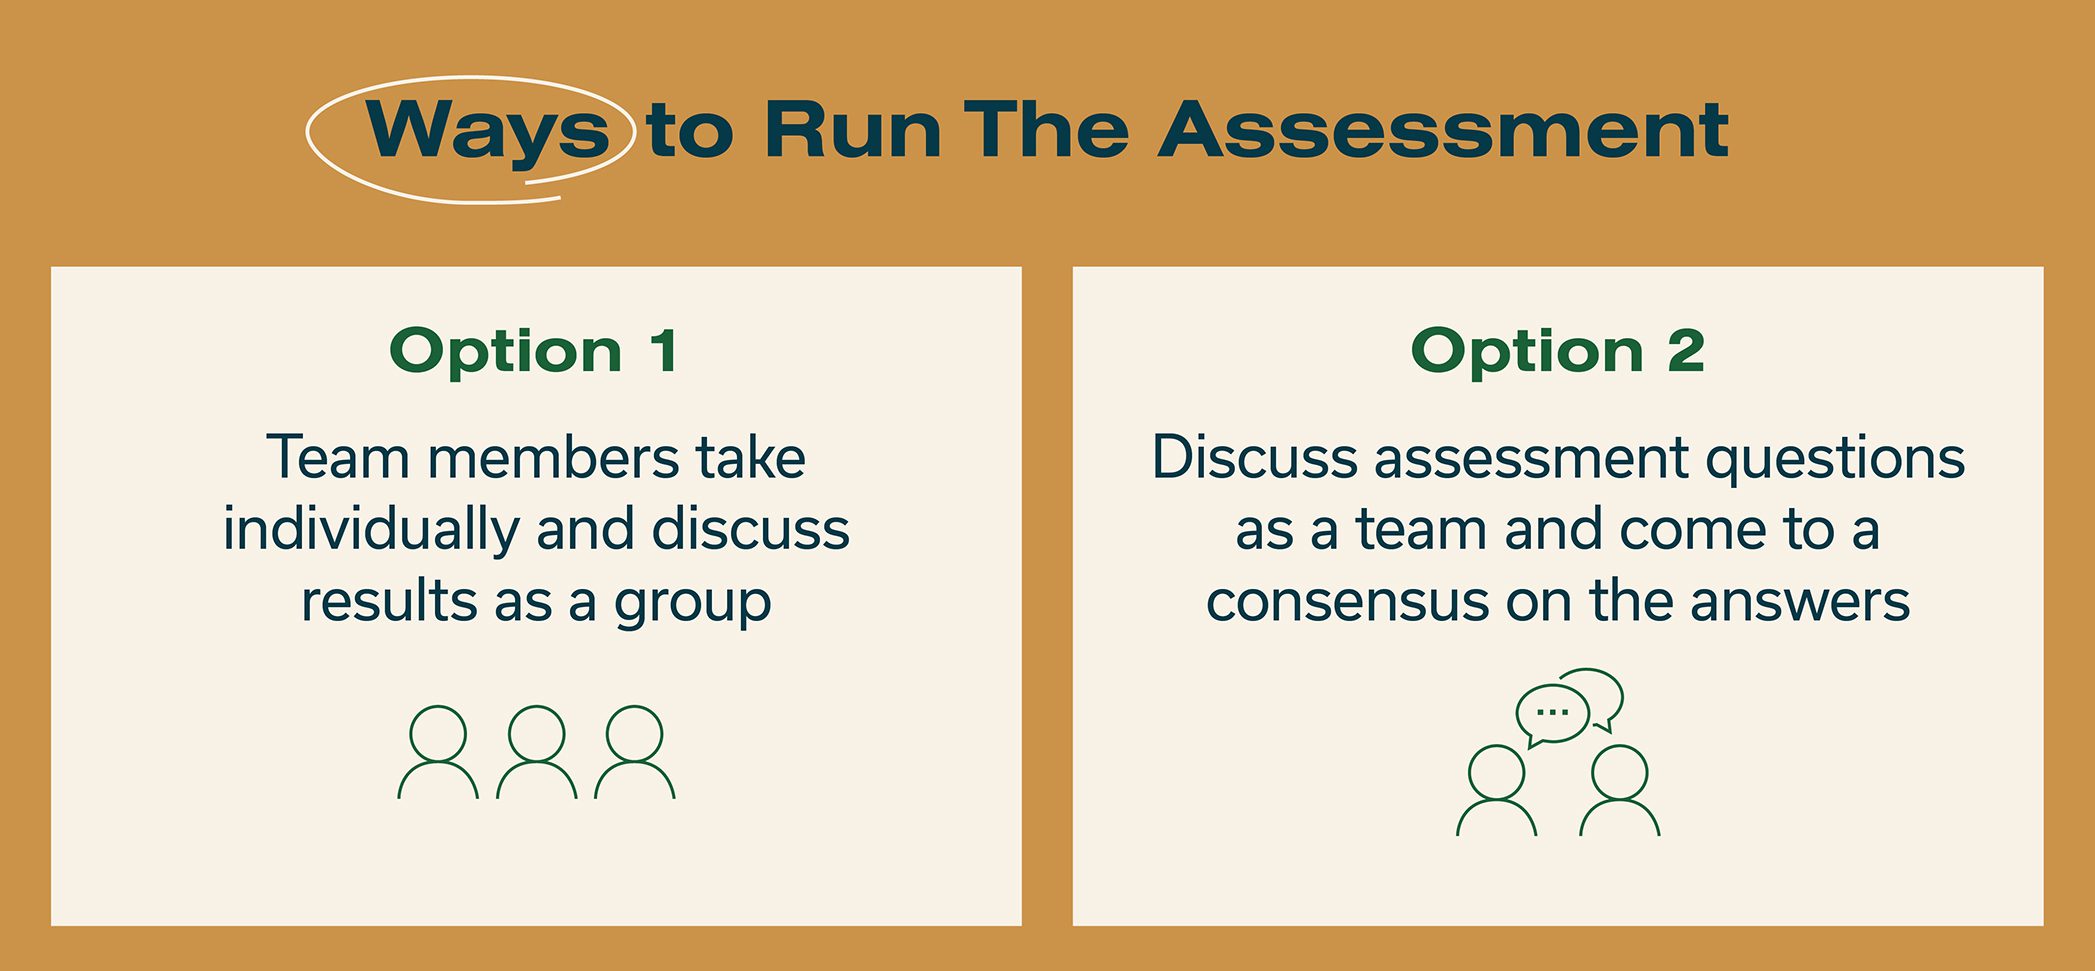 Ways to run the assessment graphic